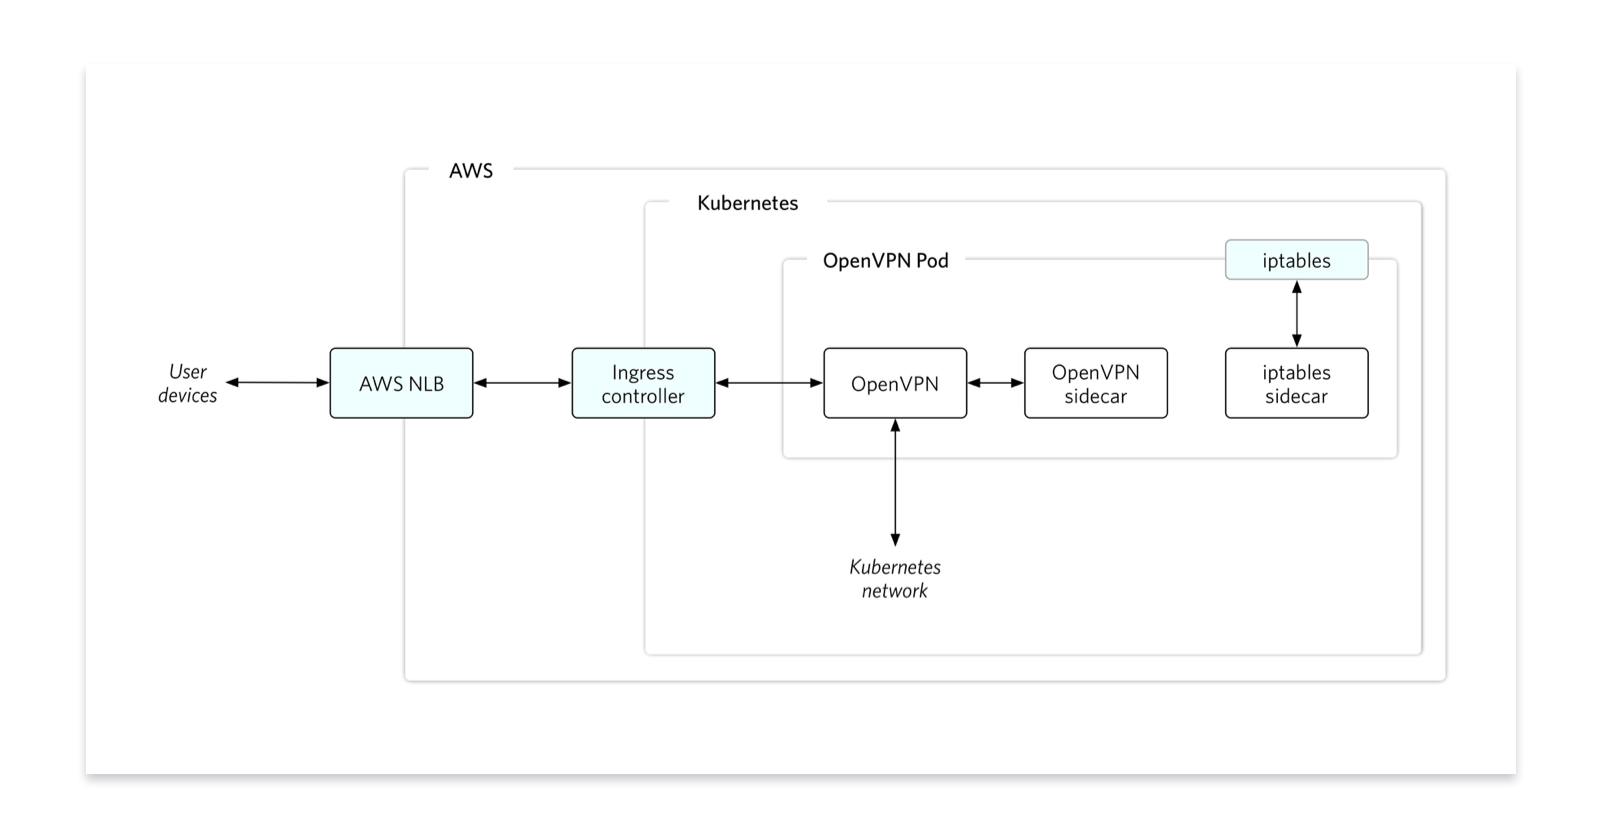 Diagram showing our platform architecture; at the entrance an AWS NLB, which talks to an Ingress controller inside Kubernetes, which then connects to an OpenVPN pod containing OpenVPN, the OpenVPN sidecar, and an iptables sidecar.